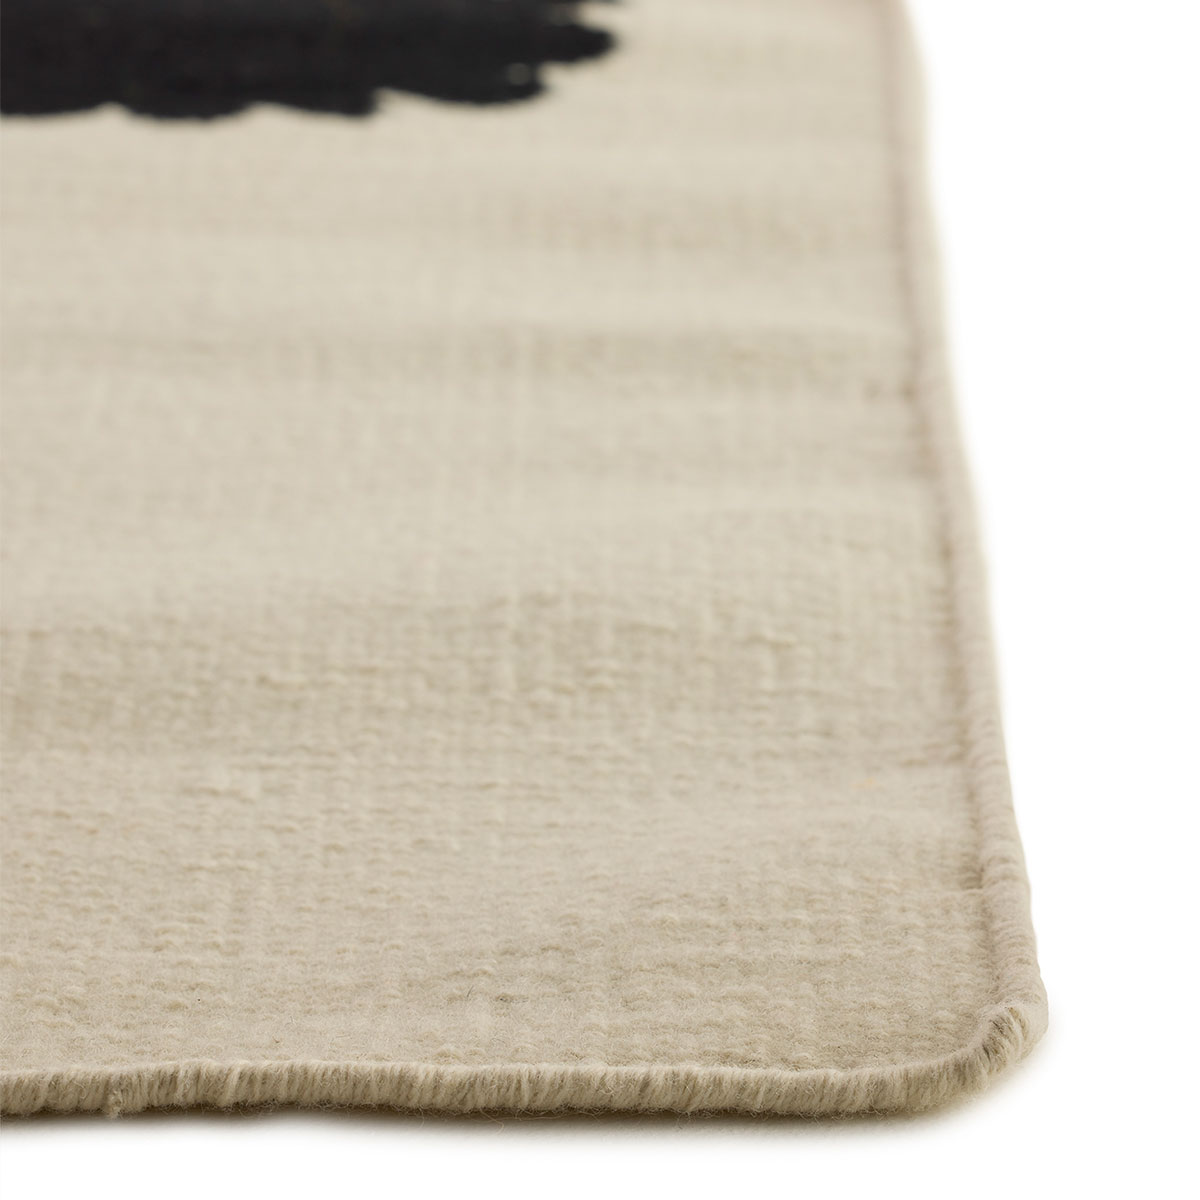 The corner detail of an abstract square beige and black green rug named Lovely Day Love.